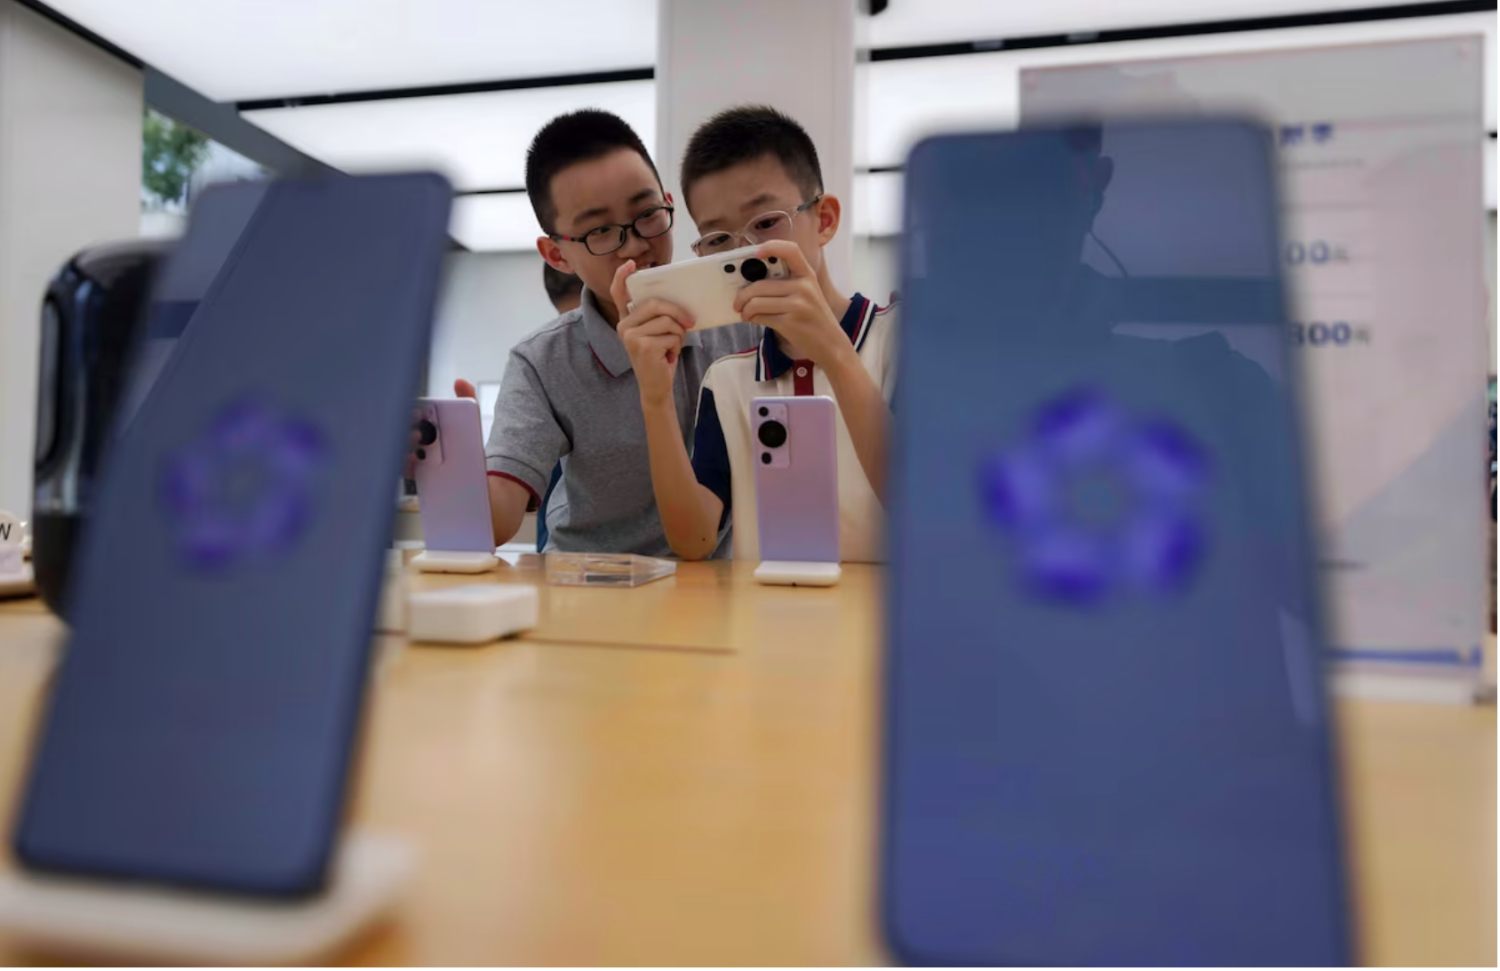 Chinese chip stocks surged in value after Huawei Technologies introduced its latest Mate 60 Pro phone. According to AnTuTu, a Chinese benchmarking website, the phone features a Kirin 9000s CPU designed by HiSilicon that supports 5G.